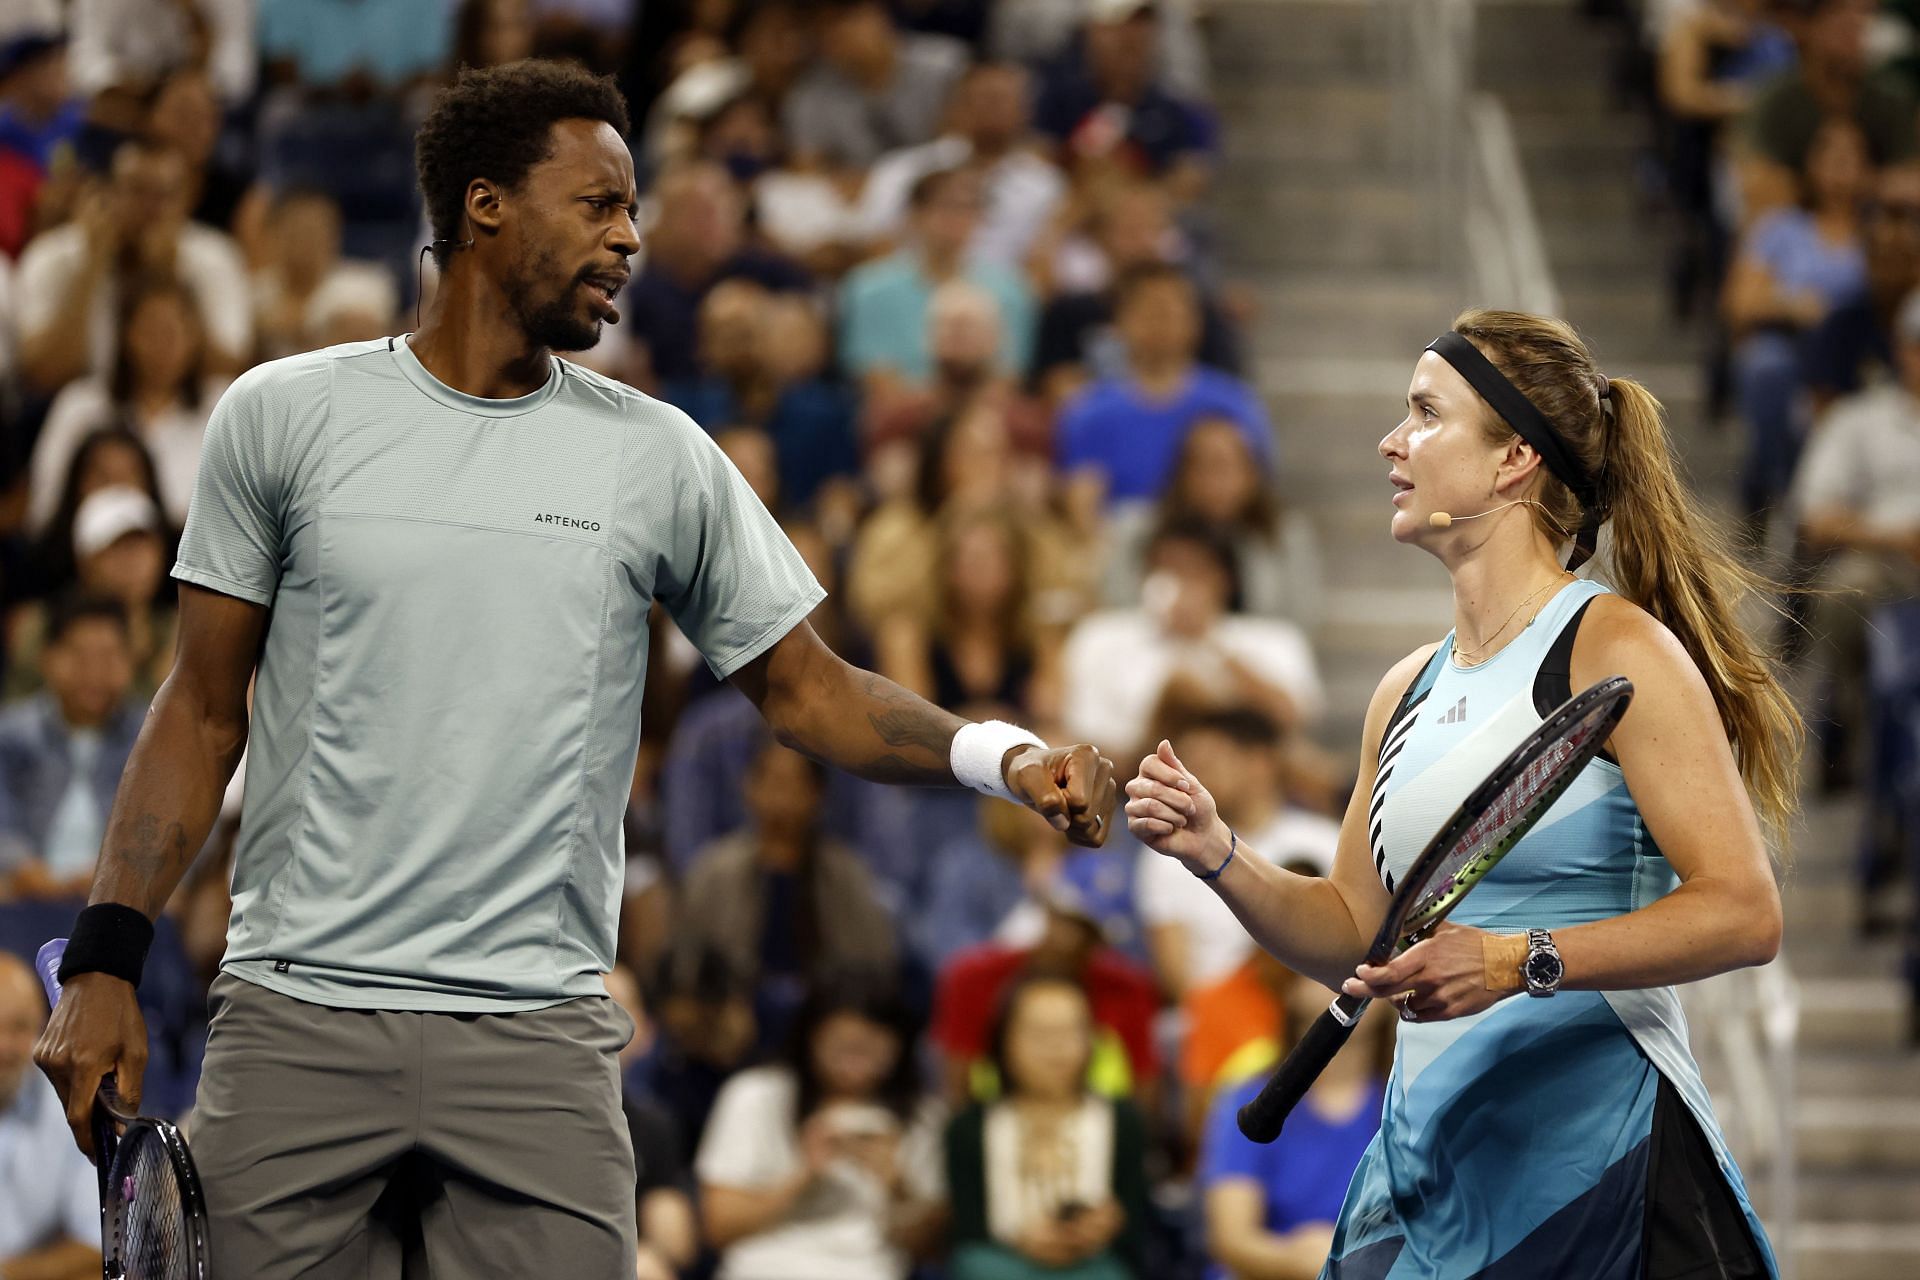 Gael Monfils and Elina Svitolina at 2023 US Open - Stars of the Open Exhibition Match to Benefit Ukraine Relief